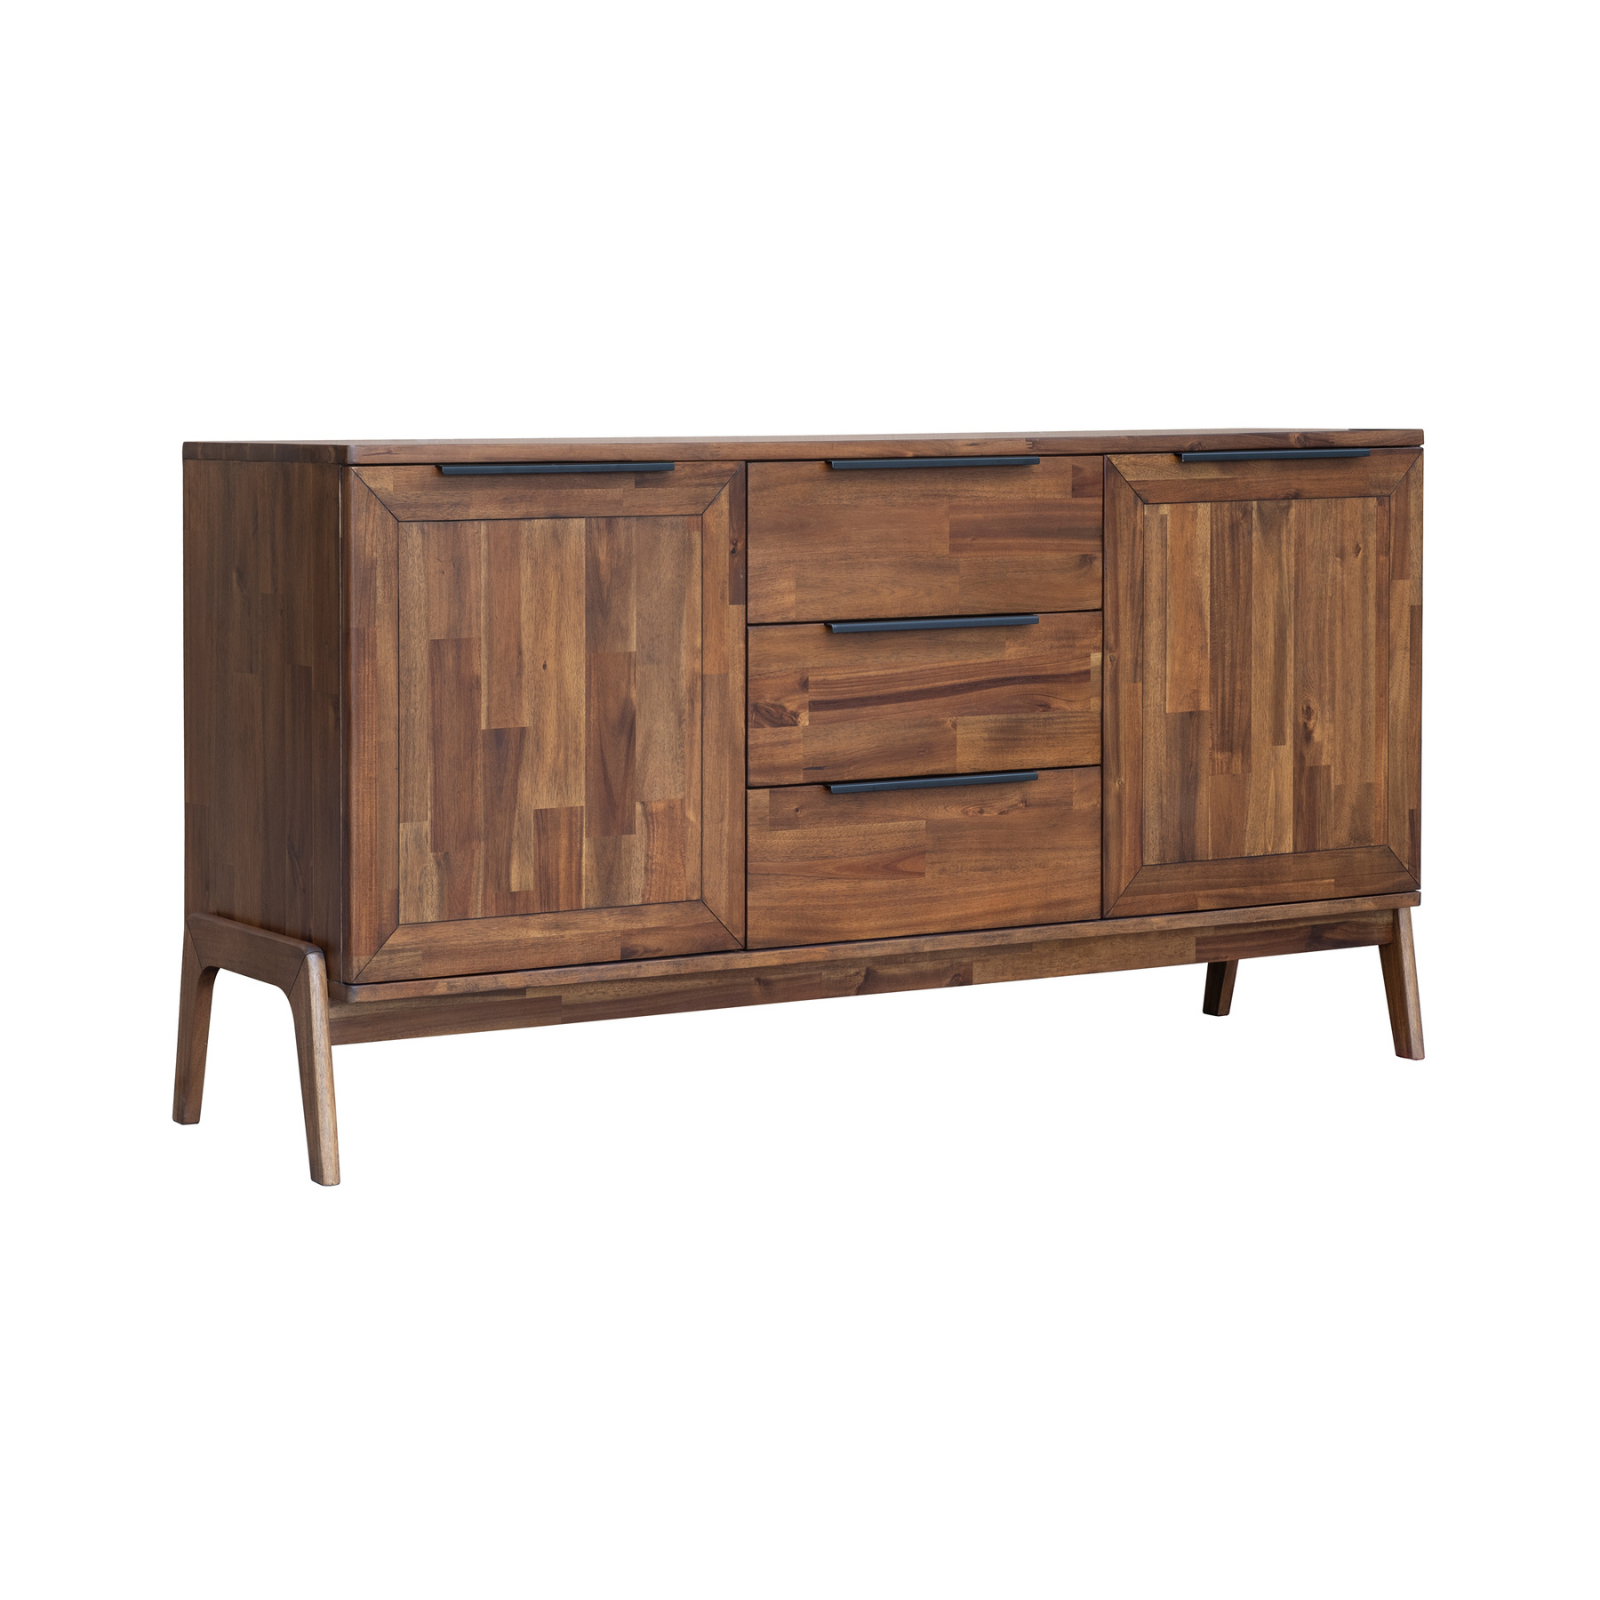 "Discover the REMIX SIDEBOARD: style meets storage. Handcrafted from acacia wood, its design exudes a mid-century aesthetic. It offers ample storage and stability with its wooden legs. Embrace its practicality and retro charm. Upgrade your space with this piece."